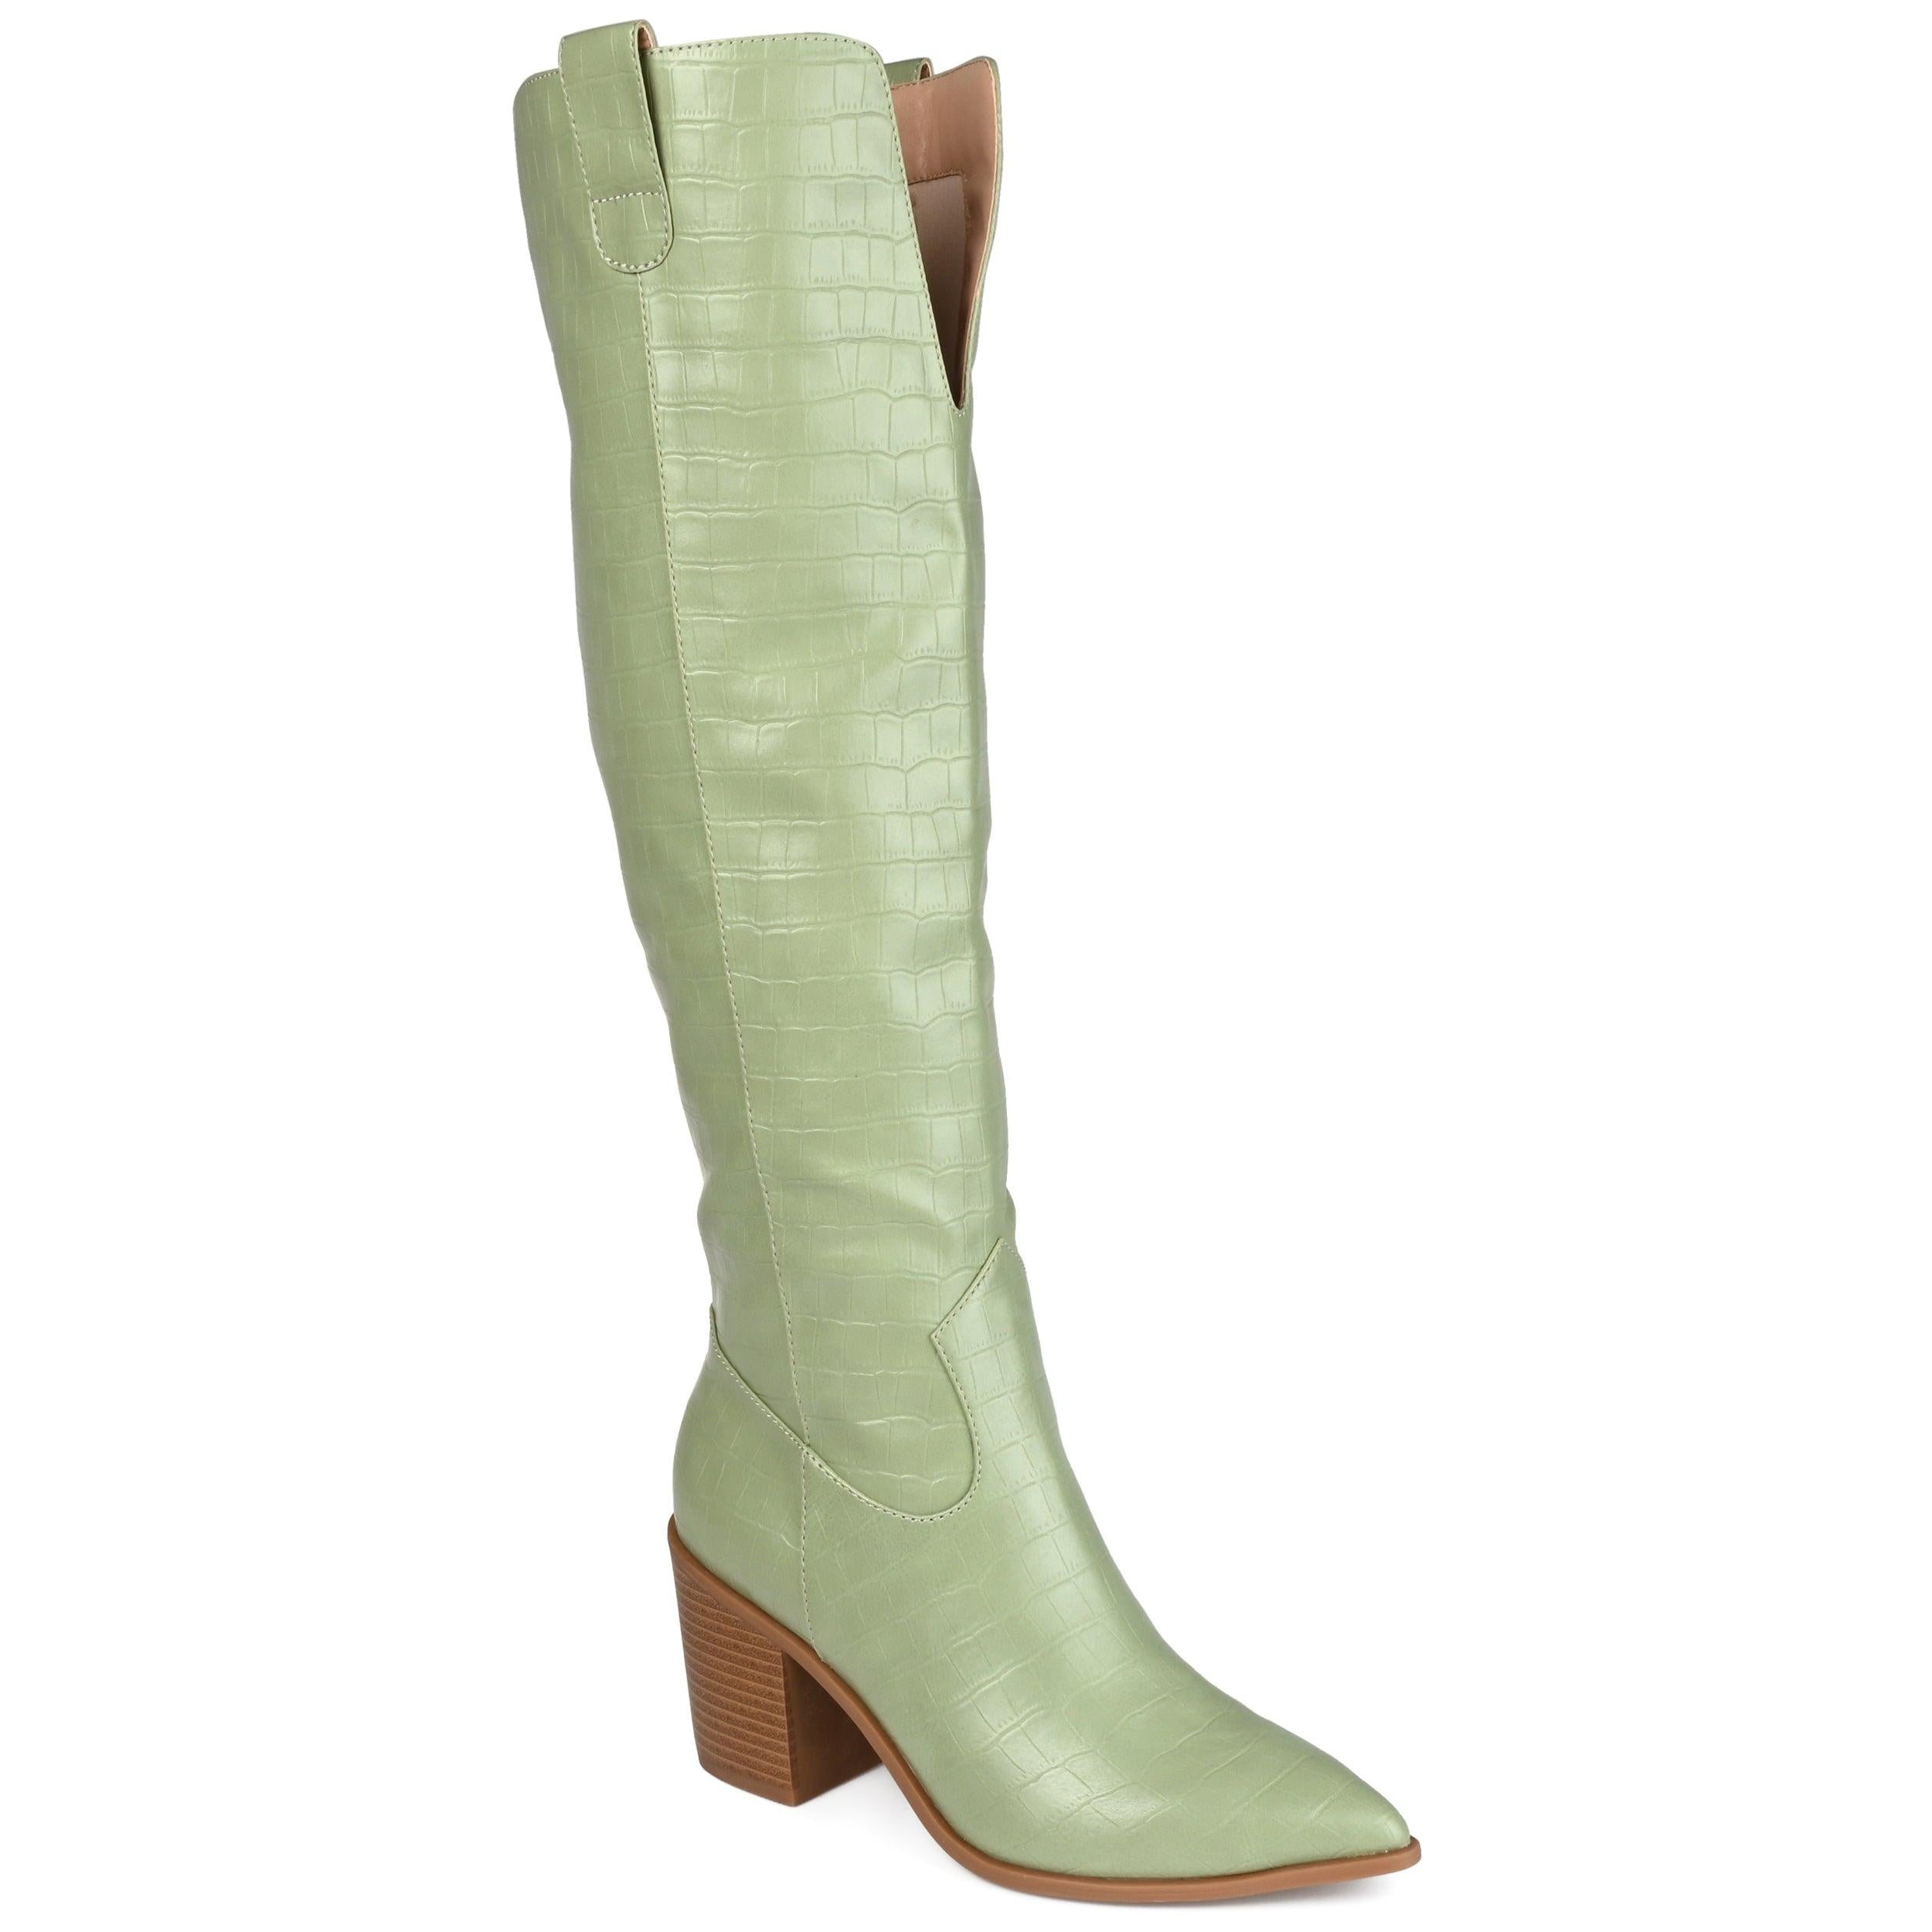 Faux Leather Fabric Calf Lime Green